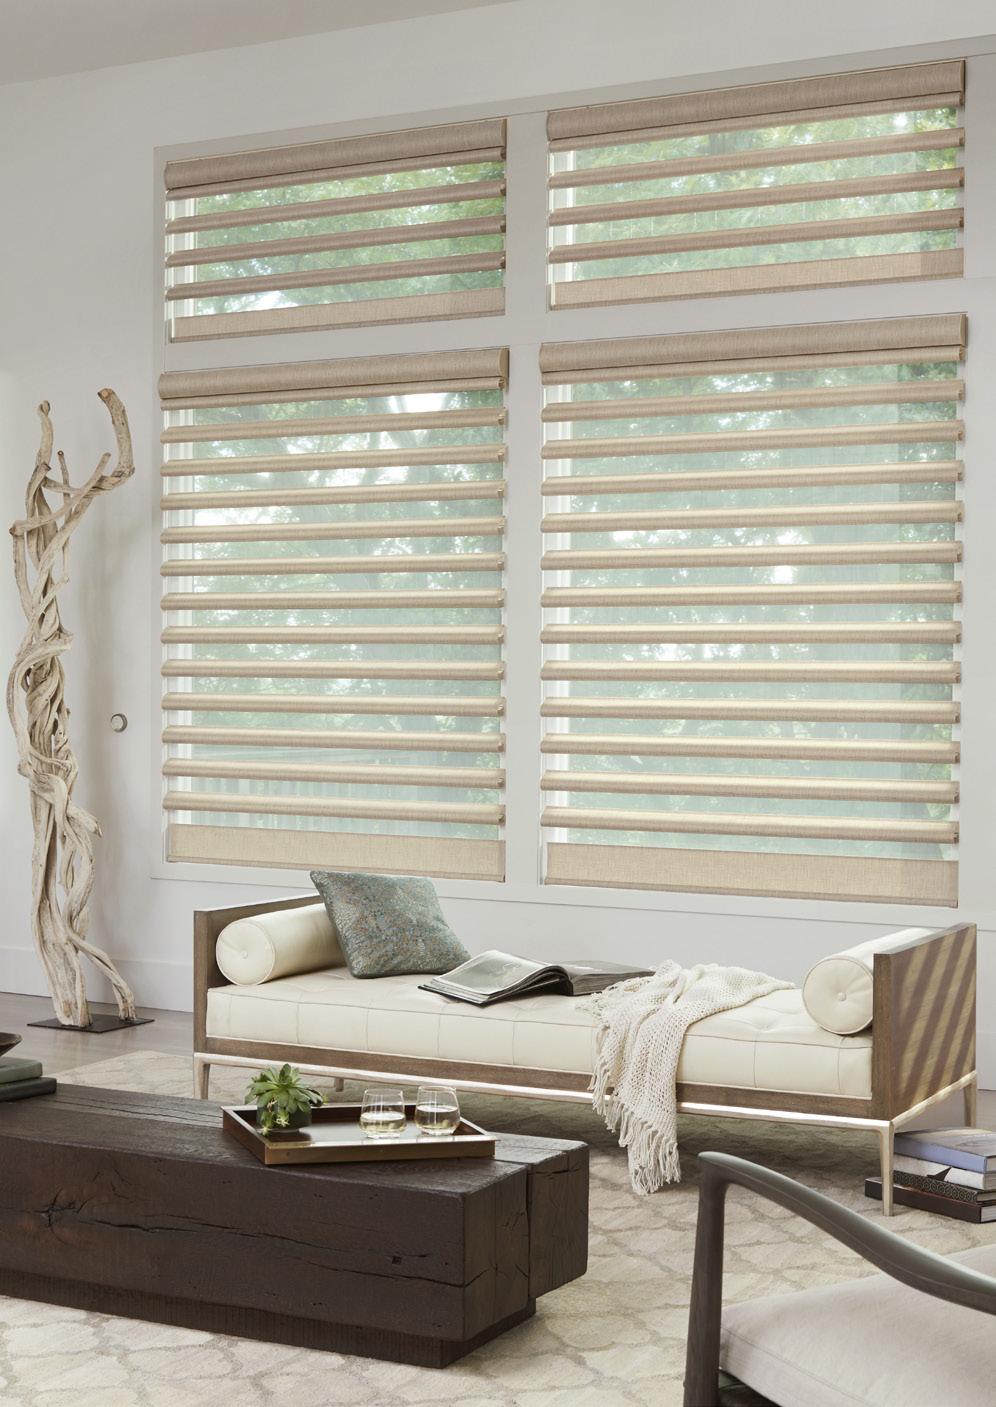 Luxaflex Pirouette Shadings Pirouette Shadings are made of 100% polyester, which means they are inherently durable and resilient.